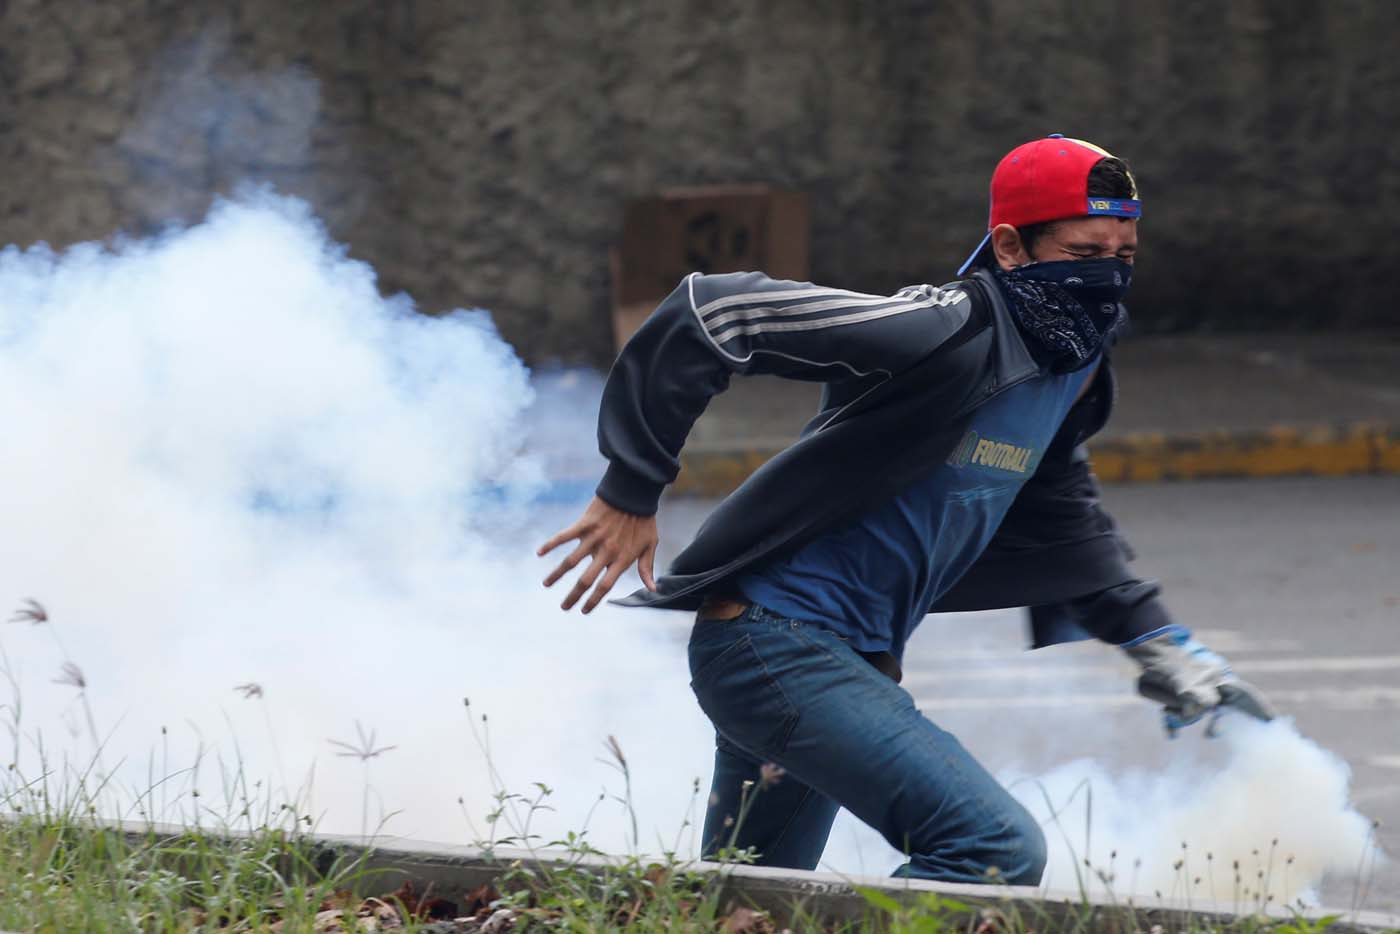 A demonstrator throws back a tear gas canister during a protest against Venezuela's President Nicolas Maduro's government in Caracas, Venezuela May 2, 2017. REUTERS/Carlos Garcia Rawlins